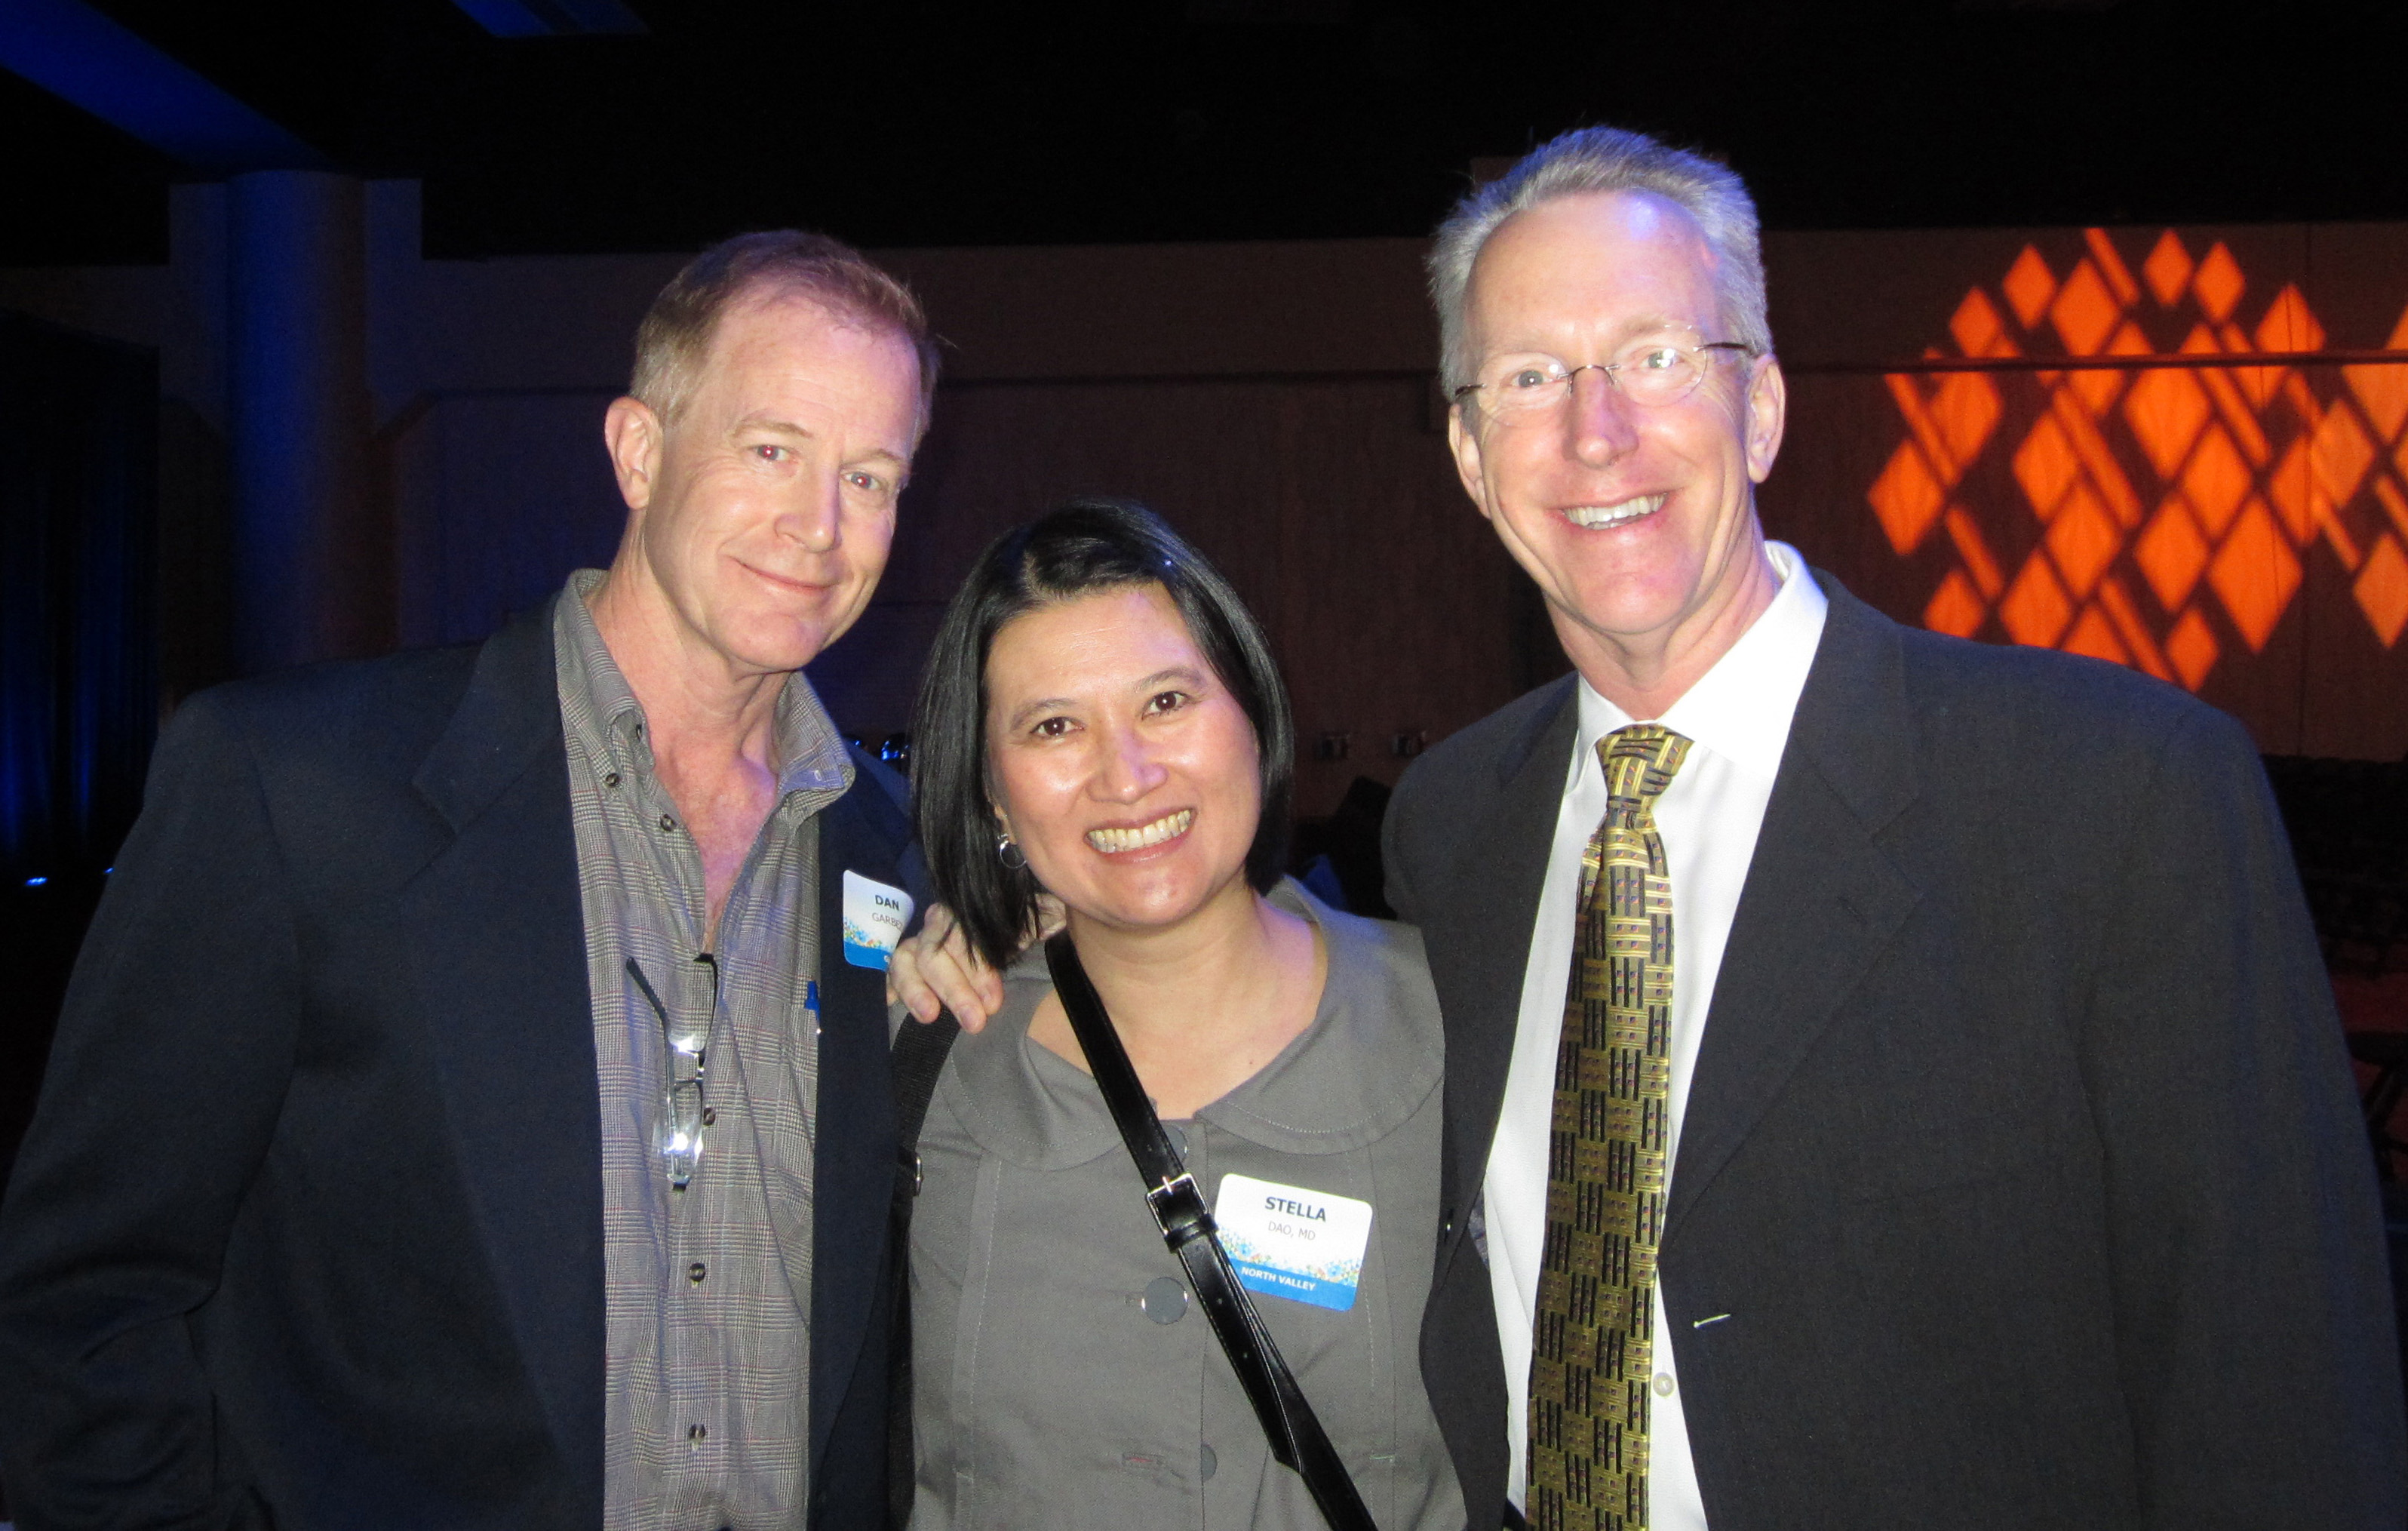 Dan Garbez and Dr. Stella Dao, with their friend Dr. Chris Palkowski, Chairman of the Board of the Permanente Medical Group, the largest medical group in the nation